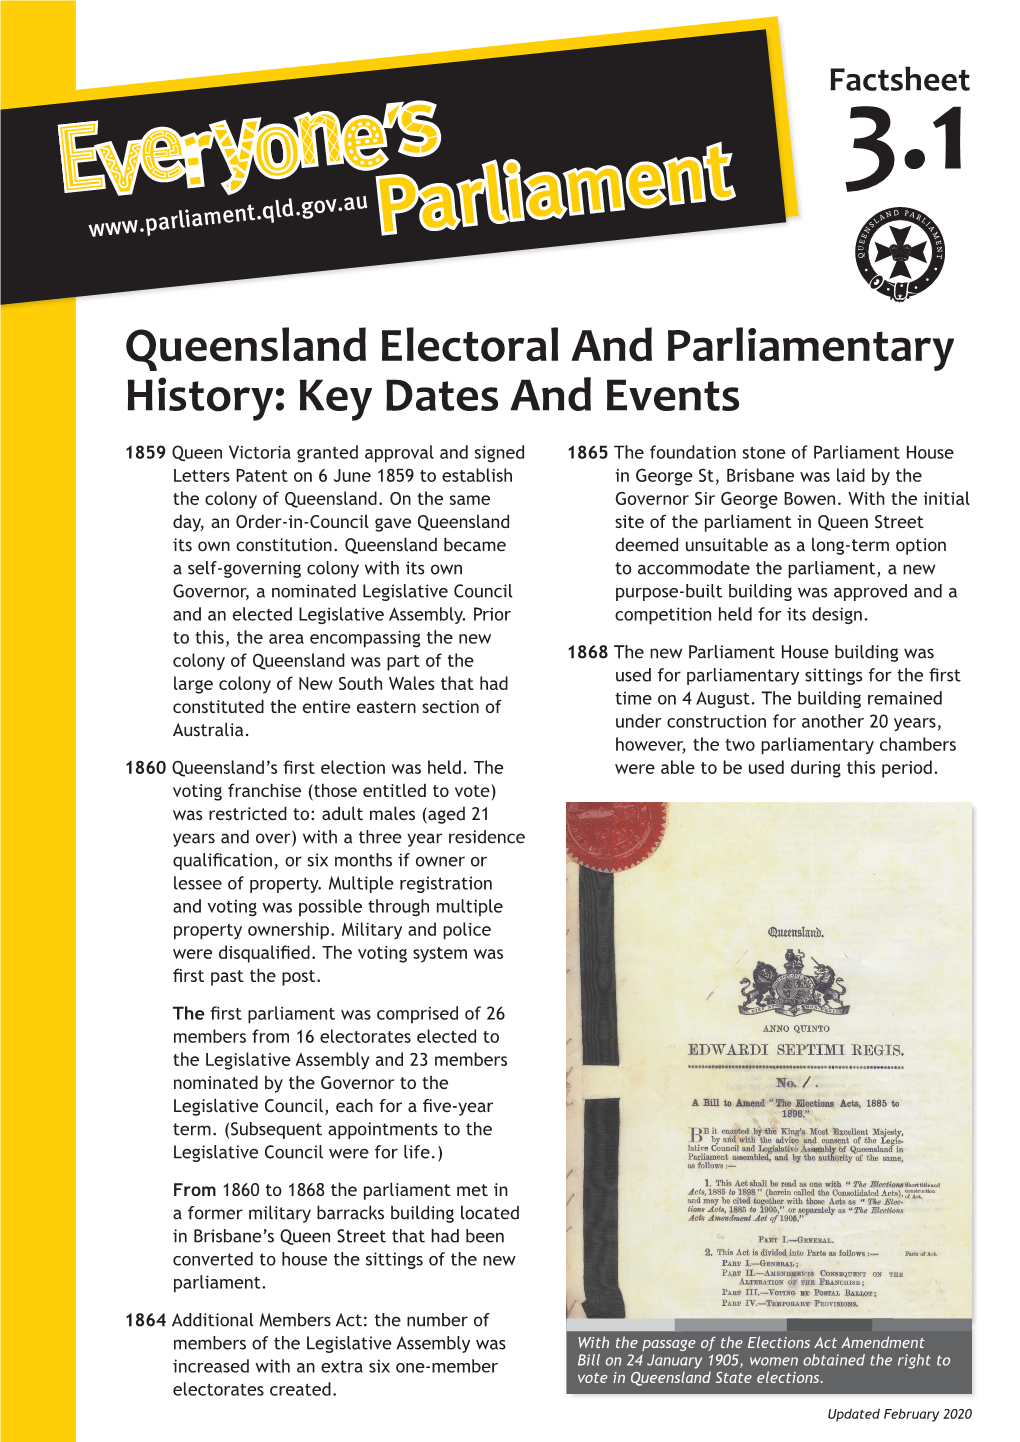 Queensland Electoral and Parliamentary History: Key Dates and Events